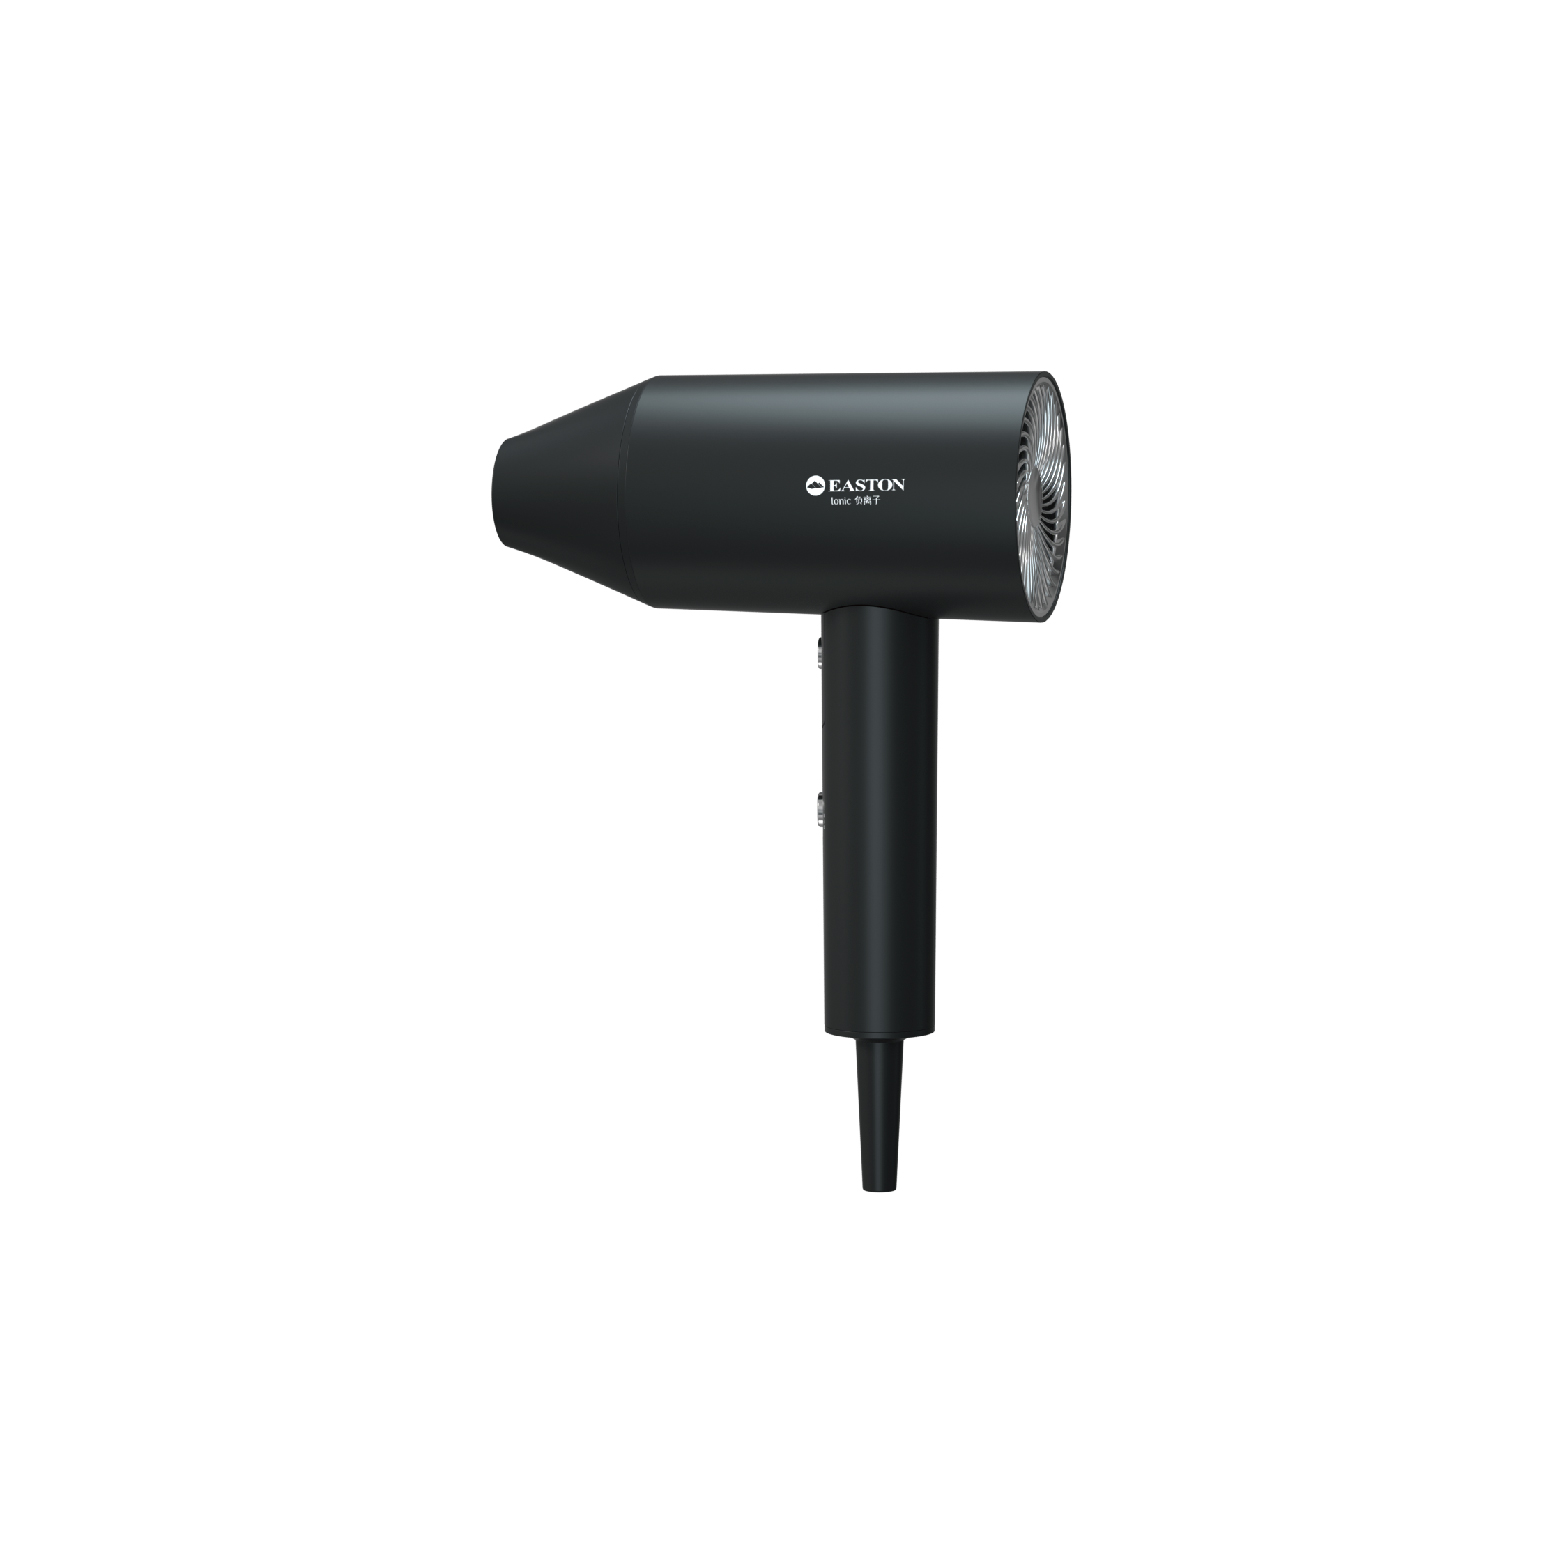 Folding Hair Dryer for High-end Hotels